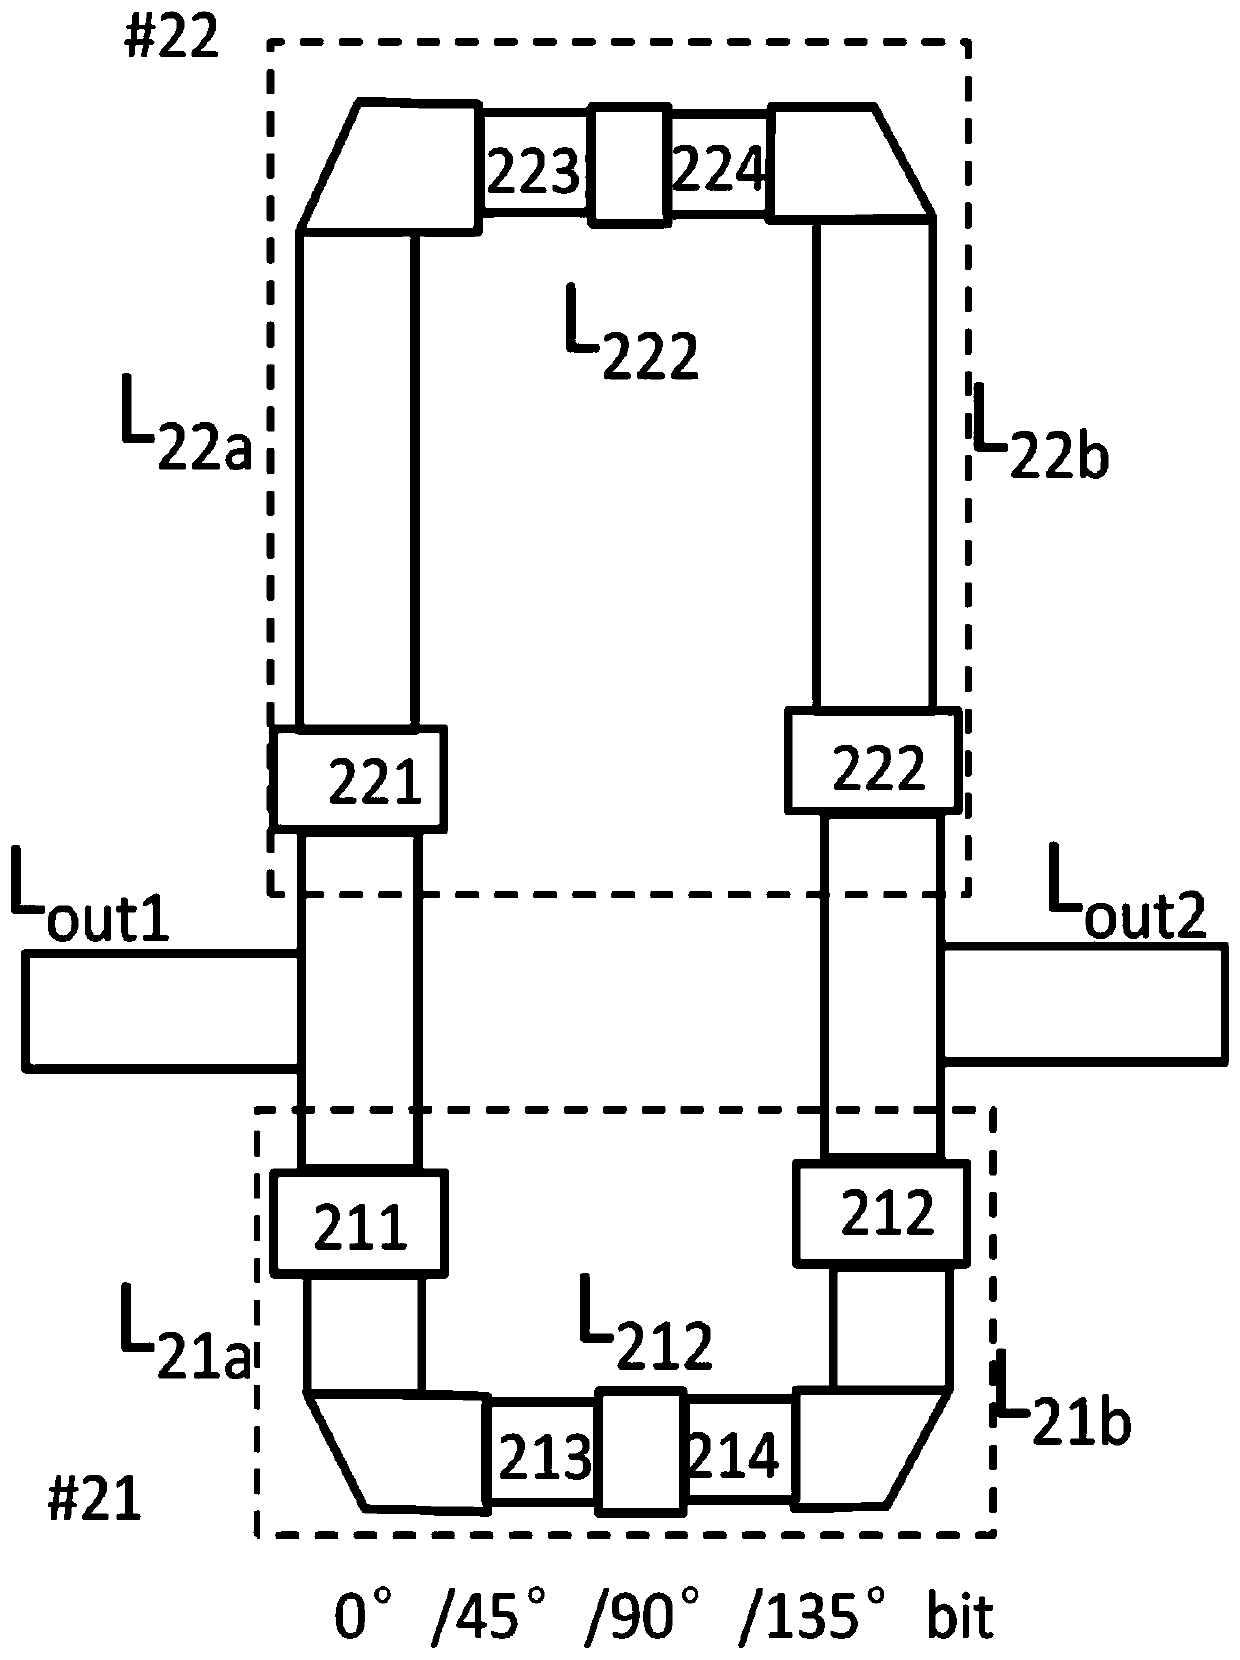 Mixed phase shifter based on MEMS switch